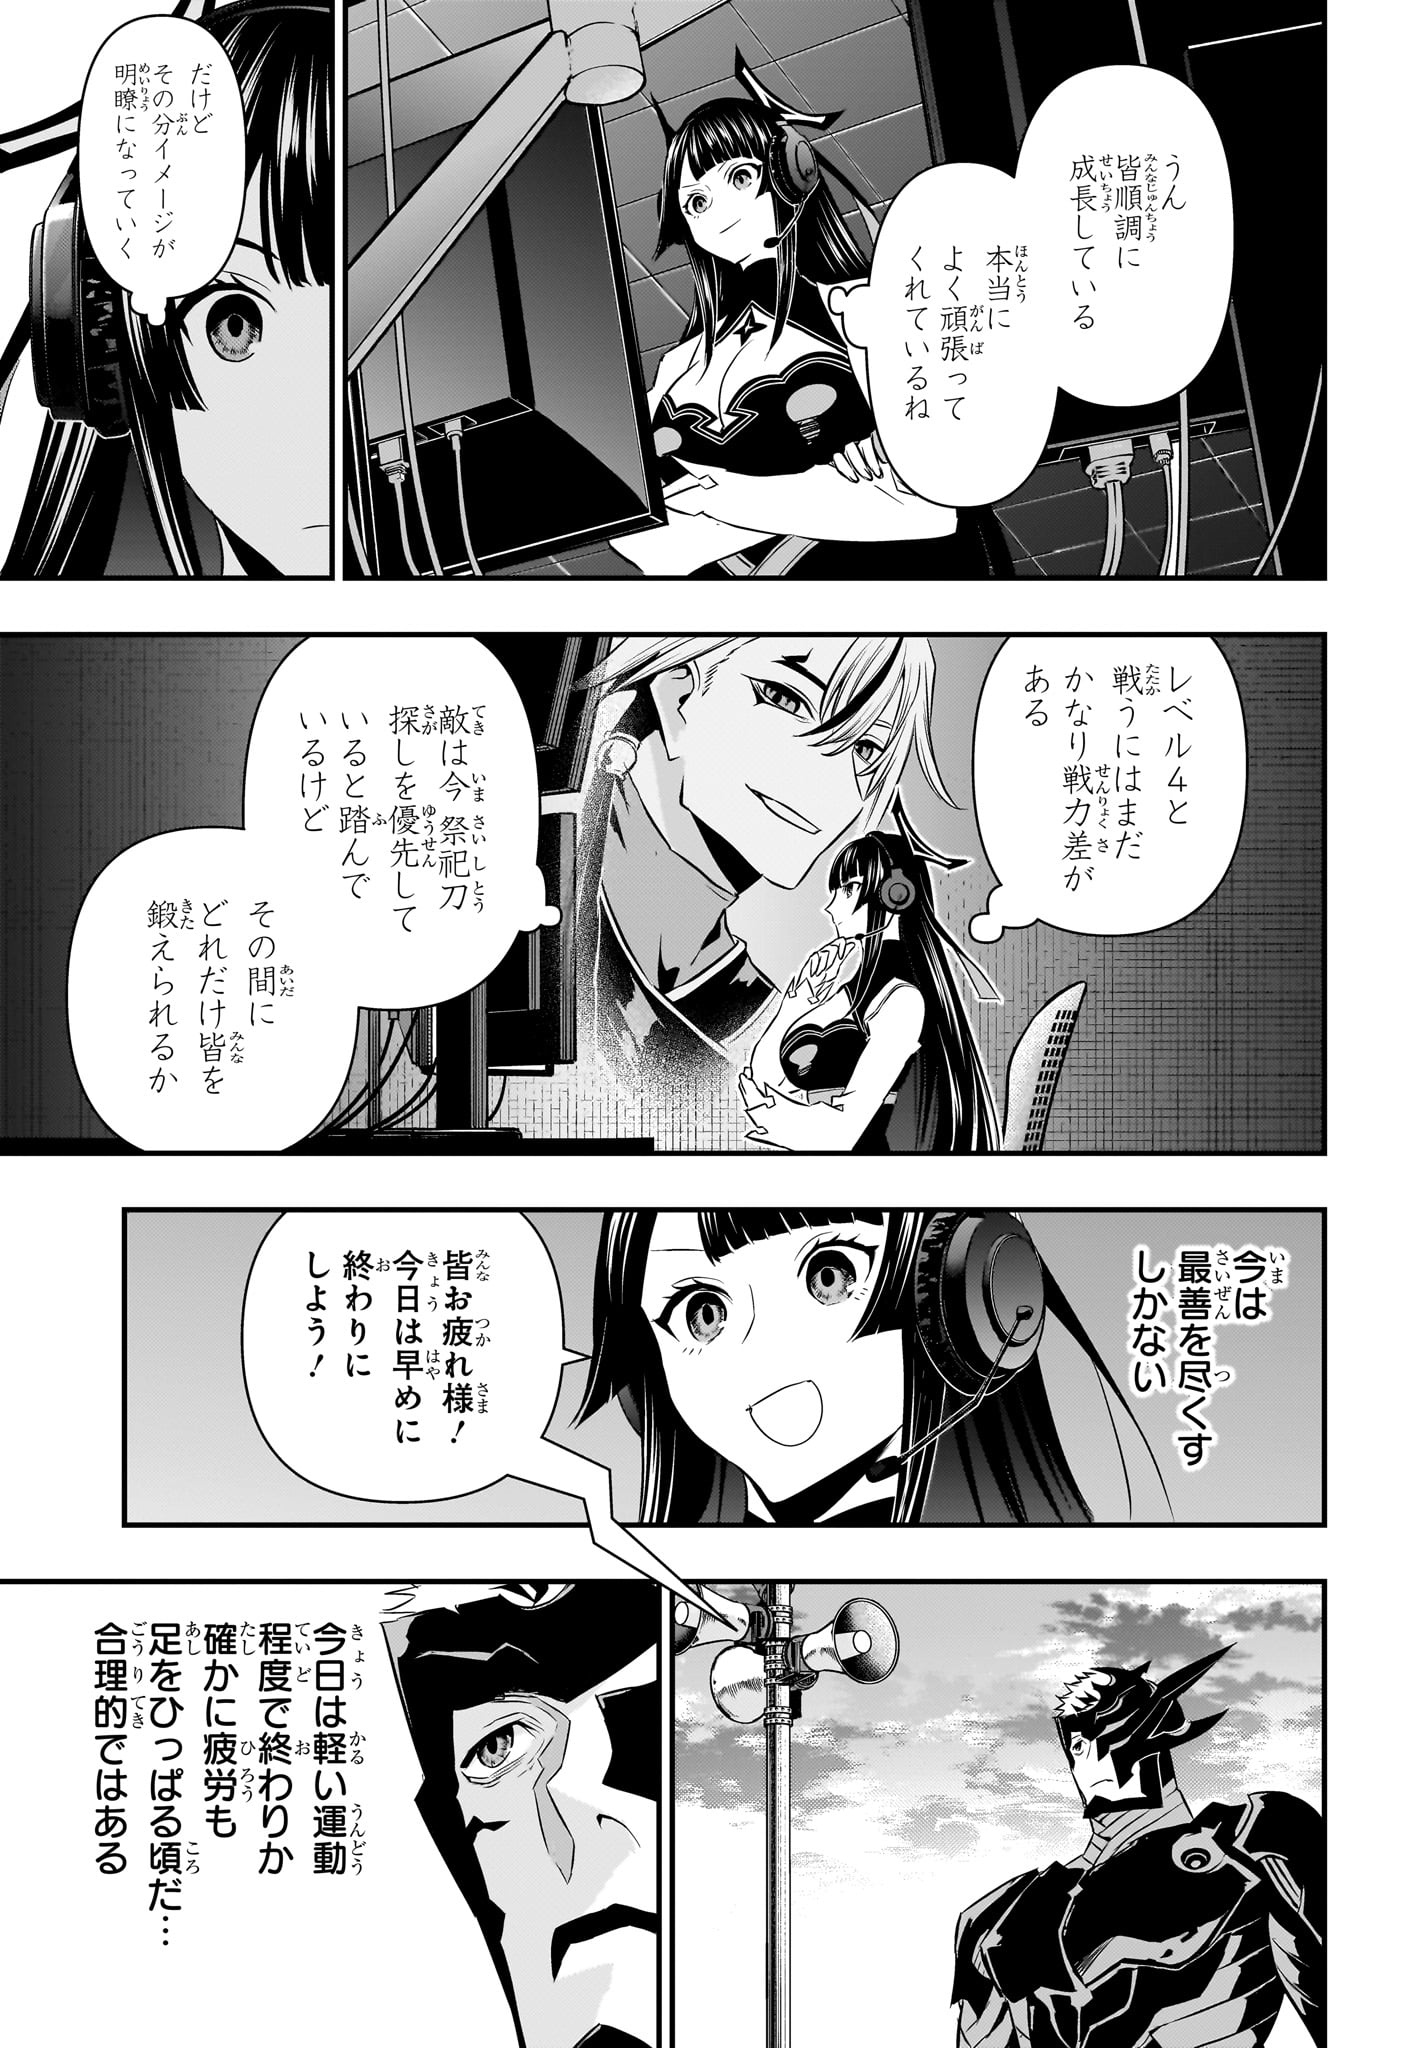 Nue no Onmyouji - Chapter 50 - Page 3